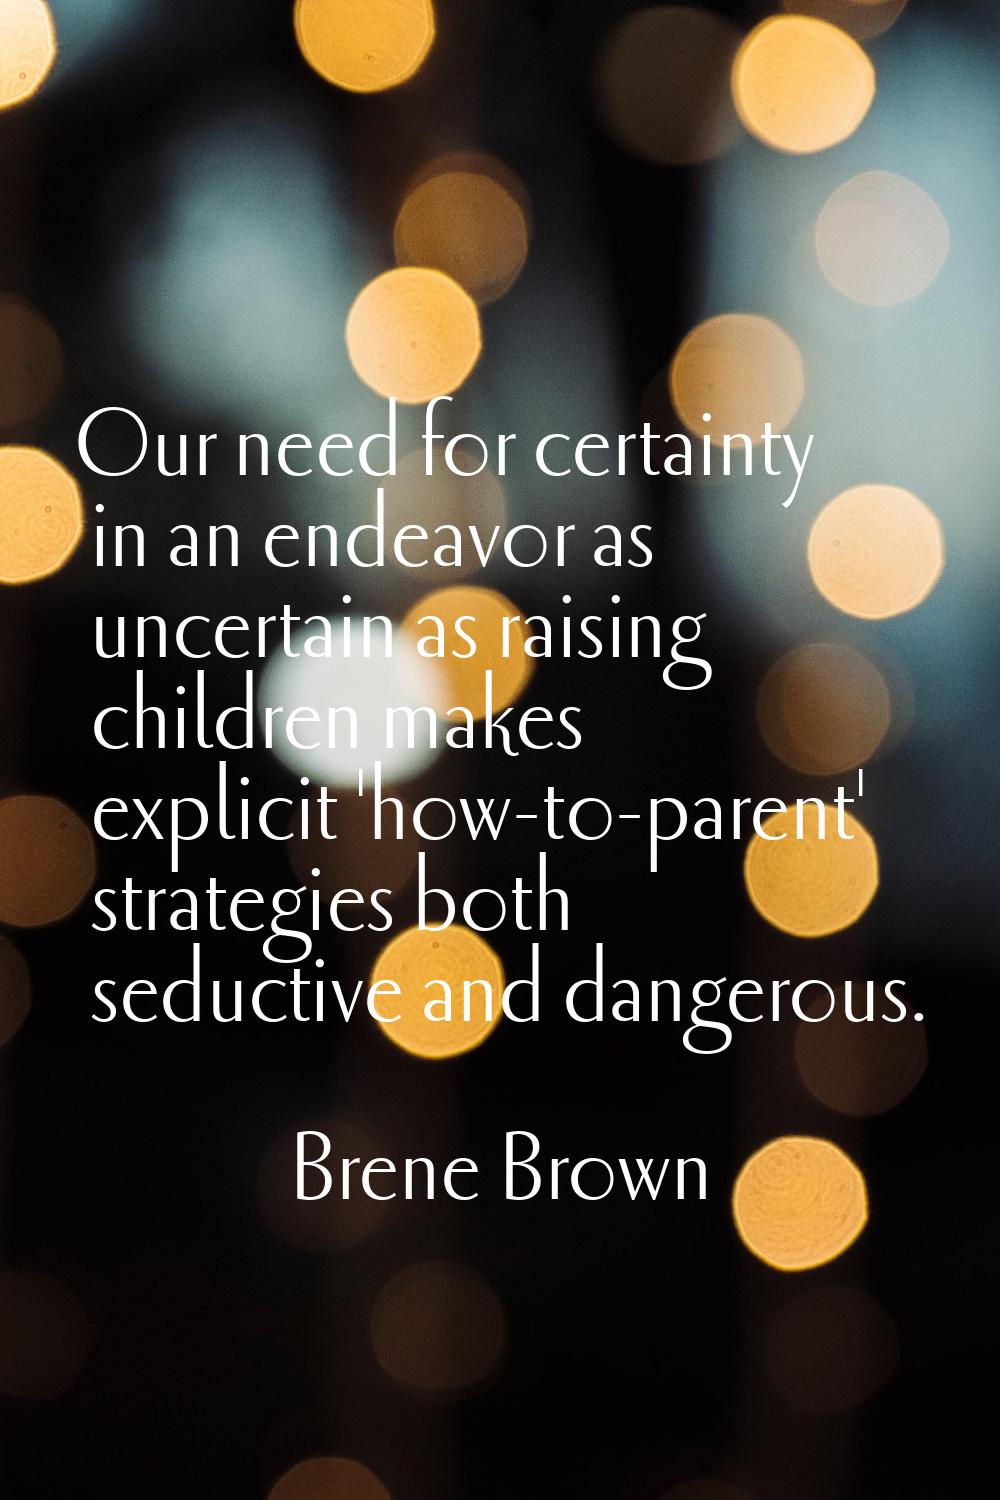 Our need for certainty in an endeavor as uncertain as raising children makes explicit 'how-to-paren